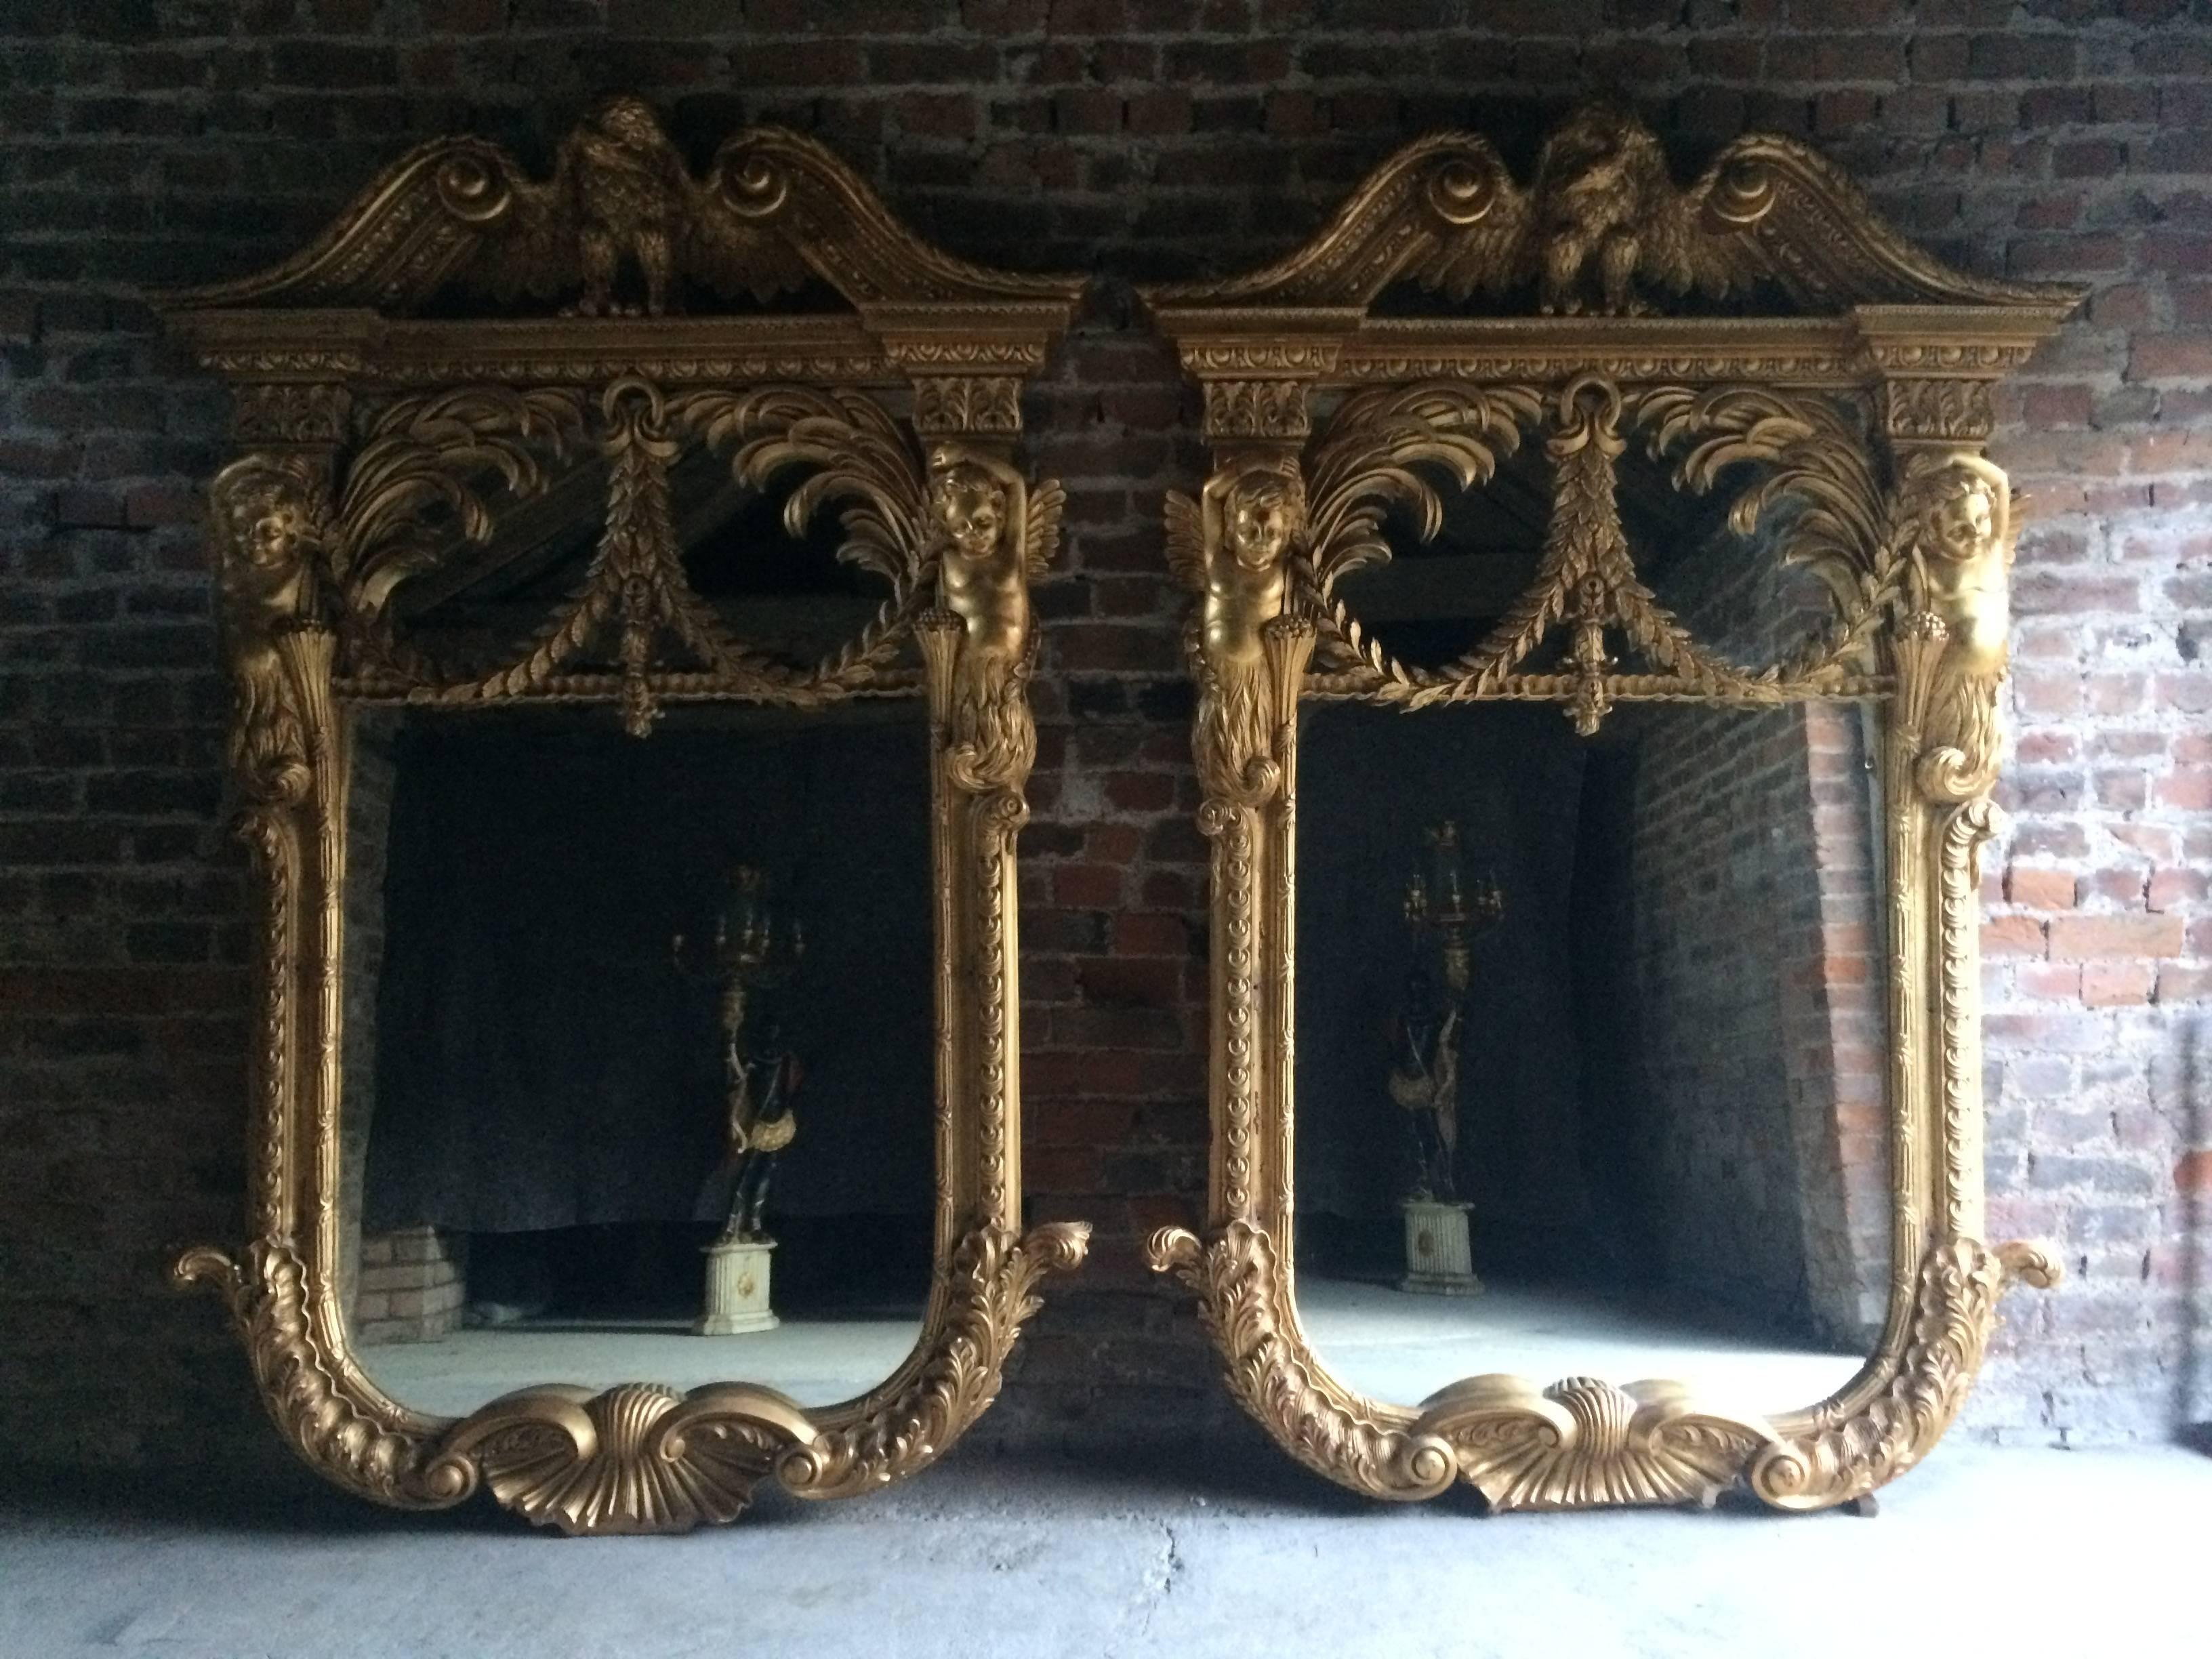 Pair of William Kent Wall Mirrors French Giltwood Very Large Rococo In Good Condition For Sale In Longdon, Tewkesbury